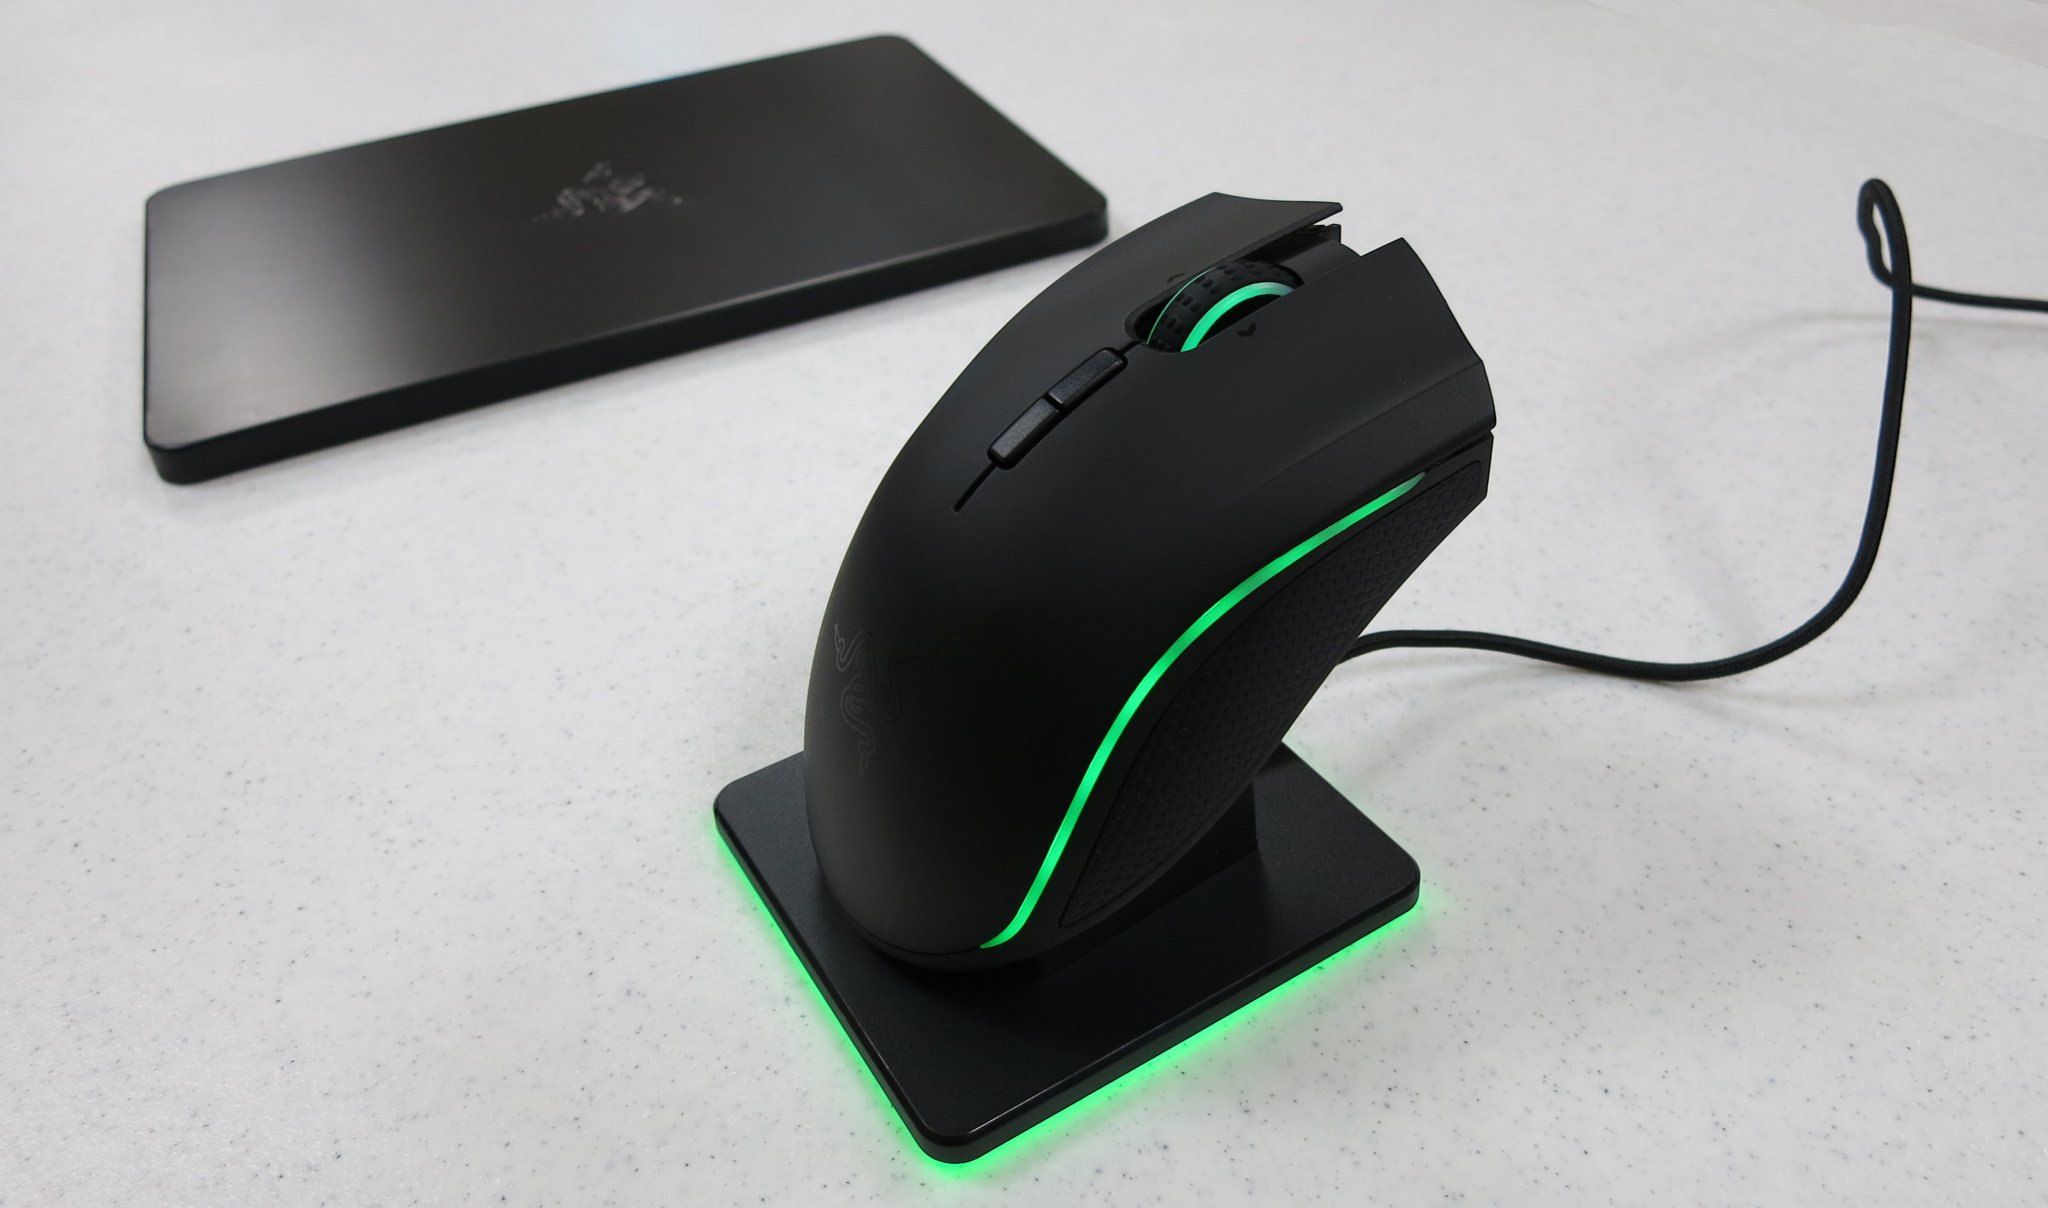 Razer Mamba Chroma review: The ultimate wireless gaming mouse